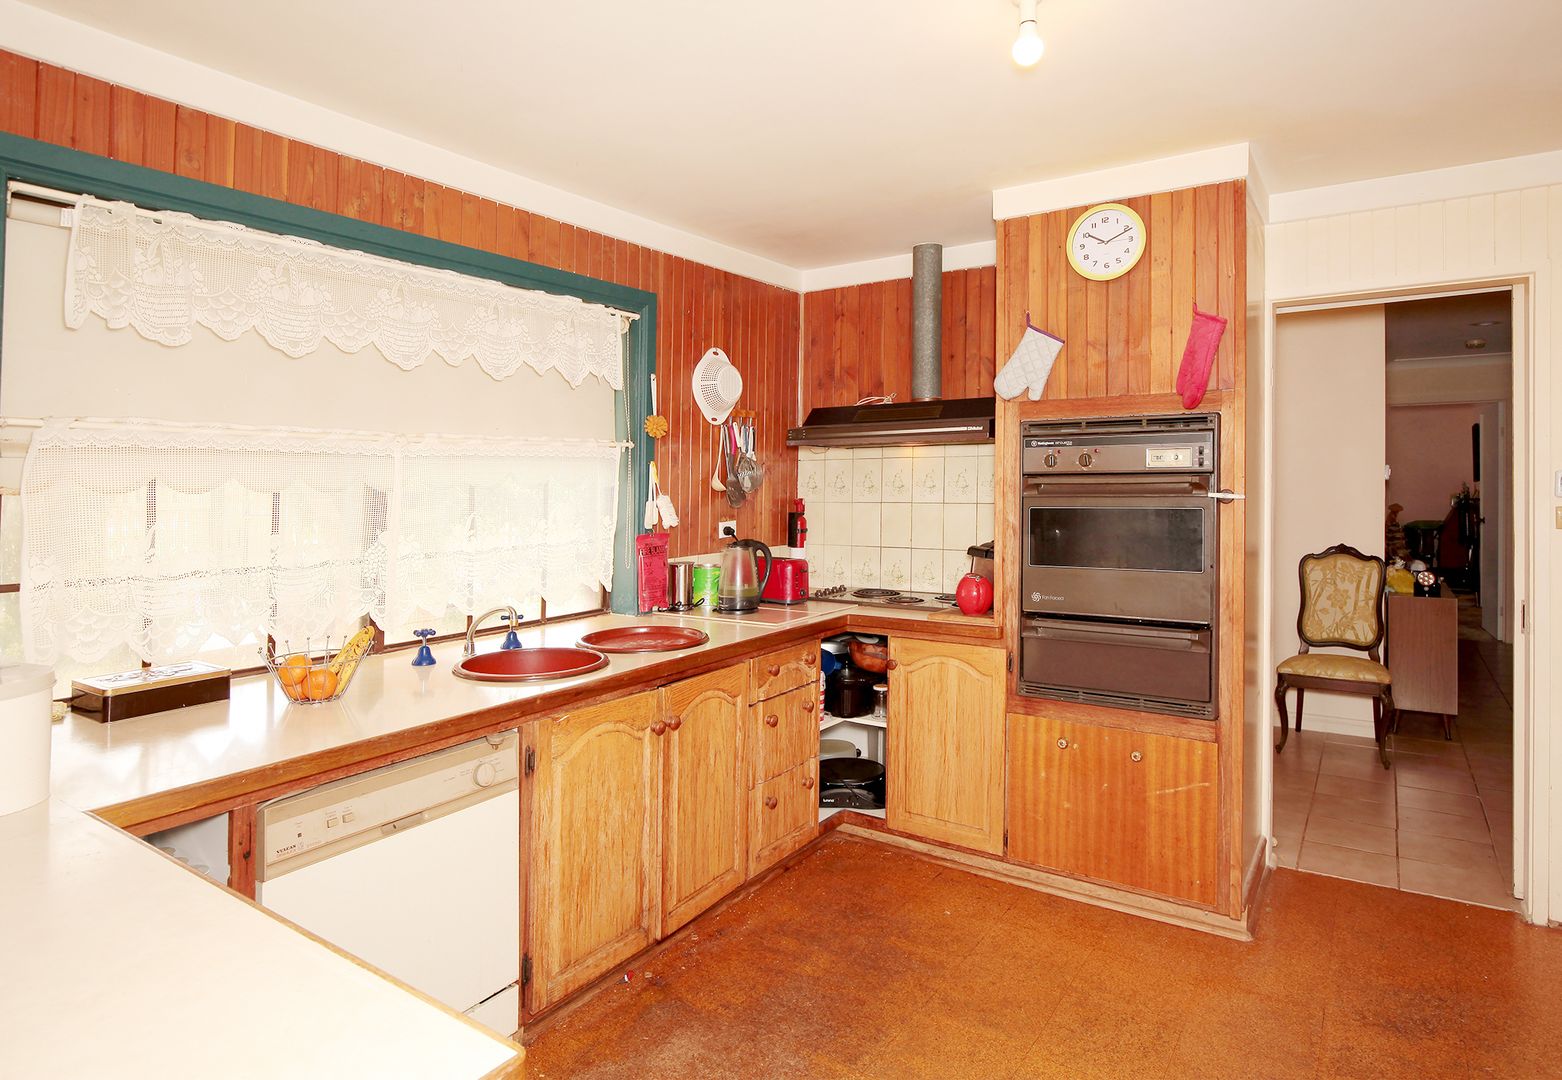 RMB 438A Jarvis Street, Oura NSW 2650, Image 2